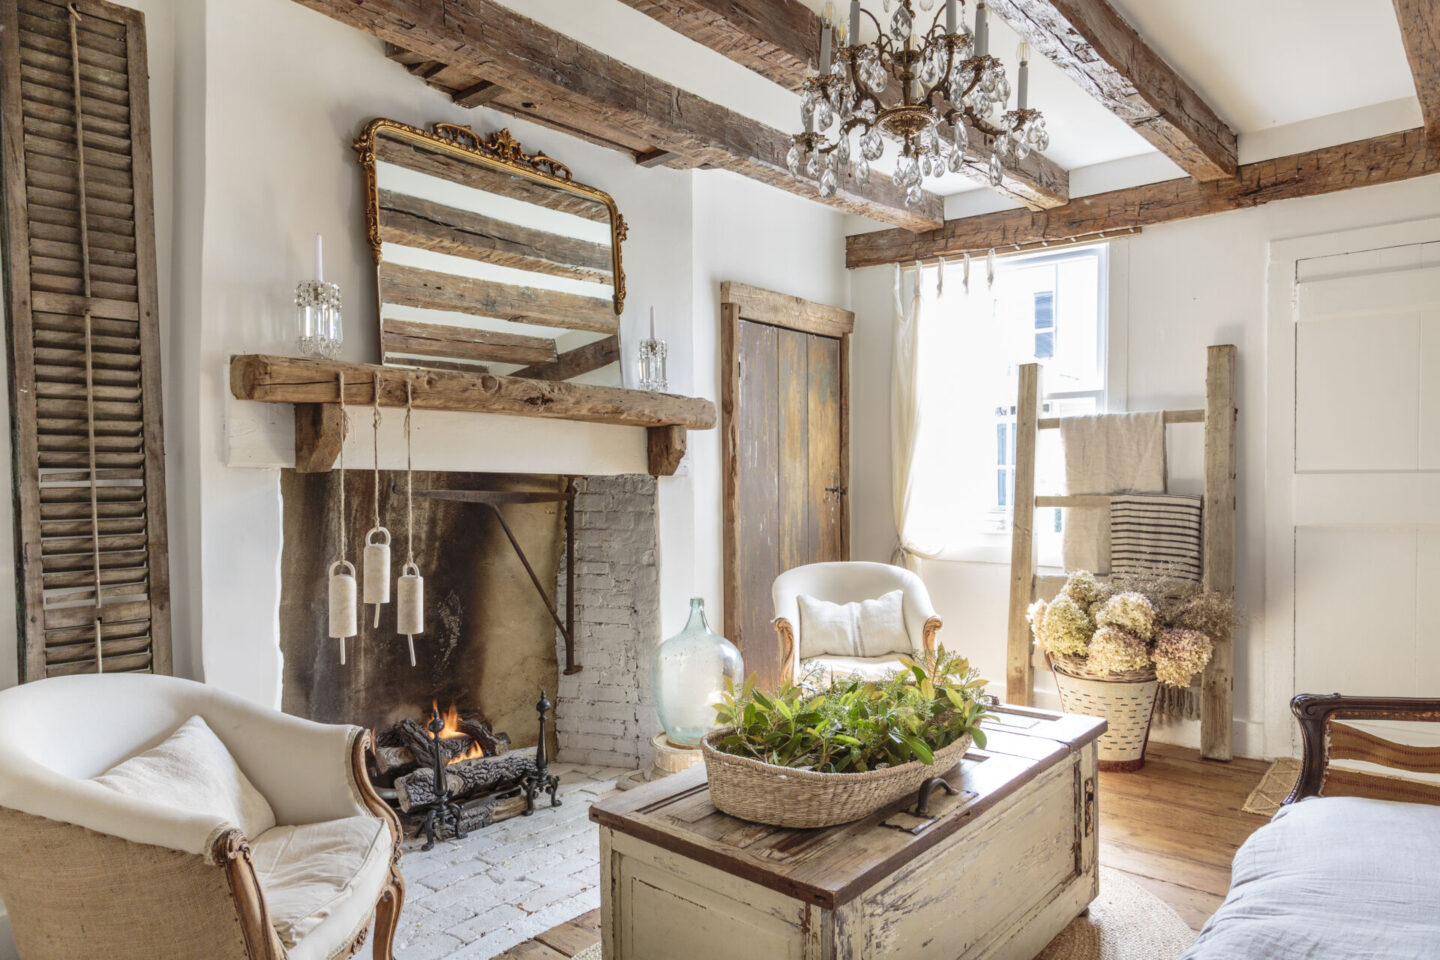 Rustic country living area with wood beams and fireplace - styling by Fifi O'Neill and photo by Mark Lohman.